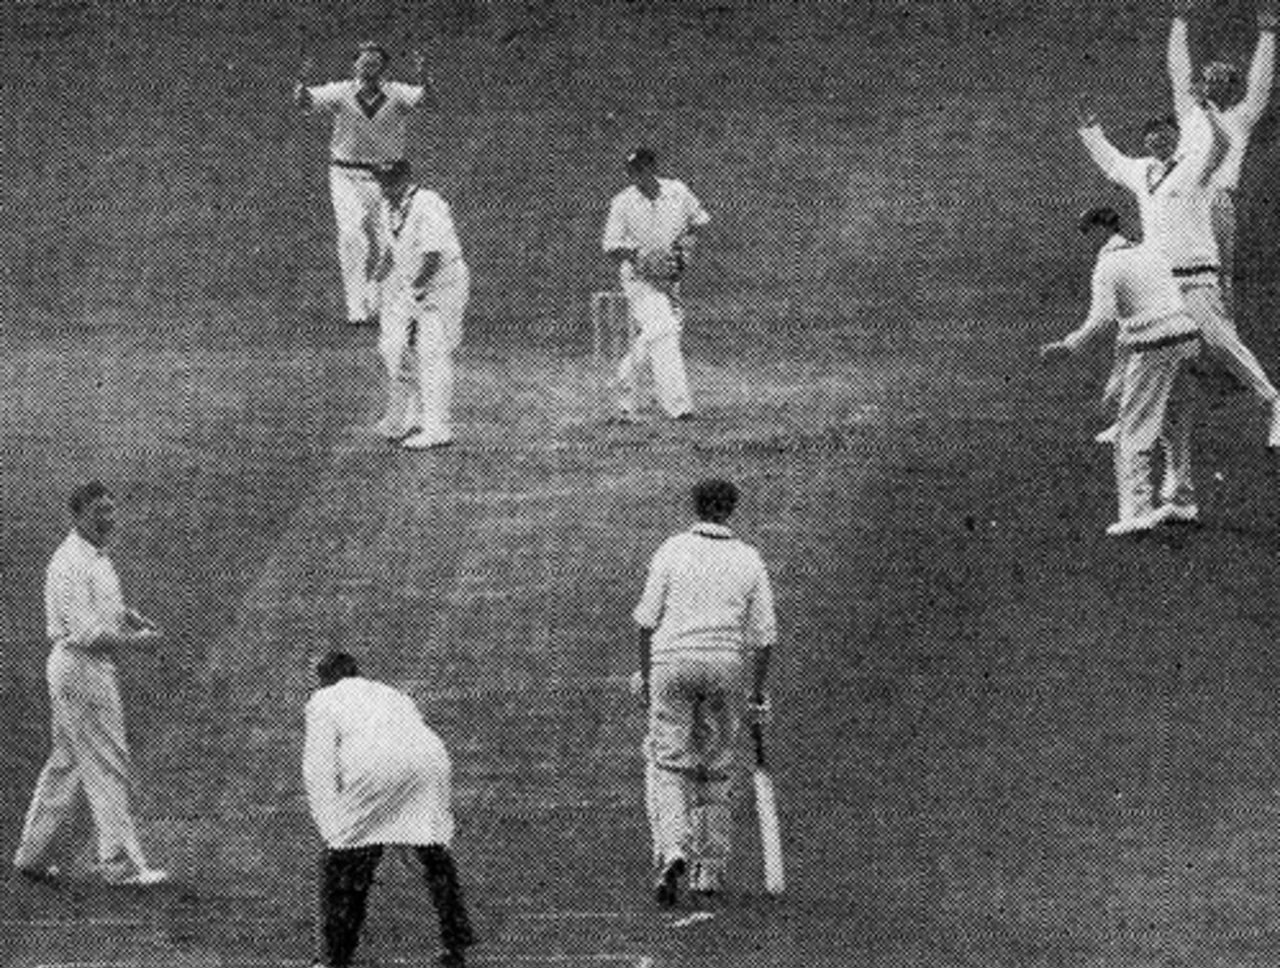 Jim Laker takes his tenth wicket as Jack Wilson is caught by Roy Swetman, Surrey v Australians, The Oval, May 16, 1956